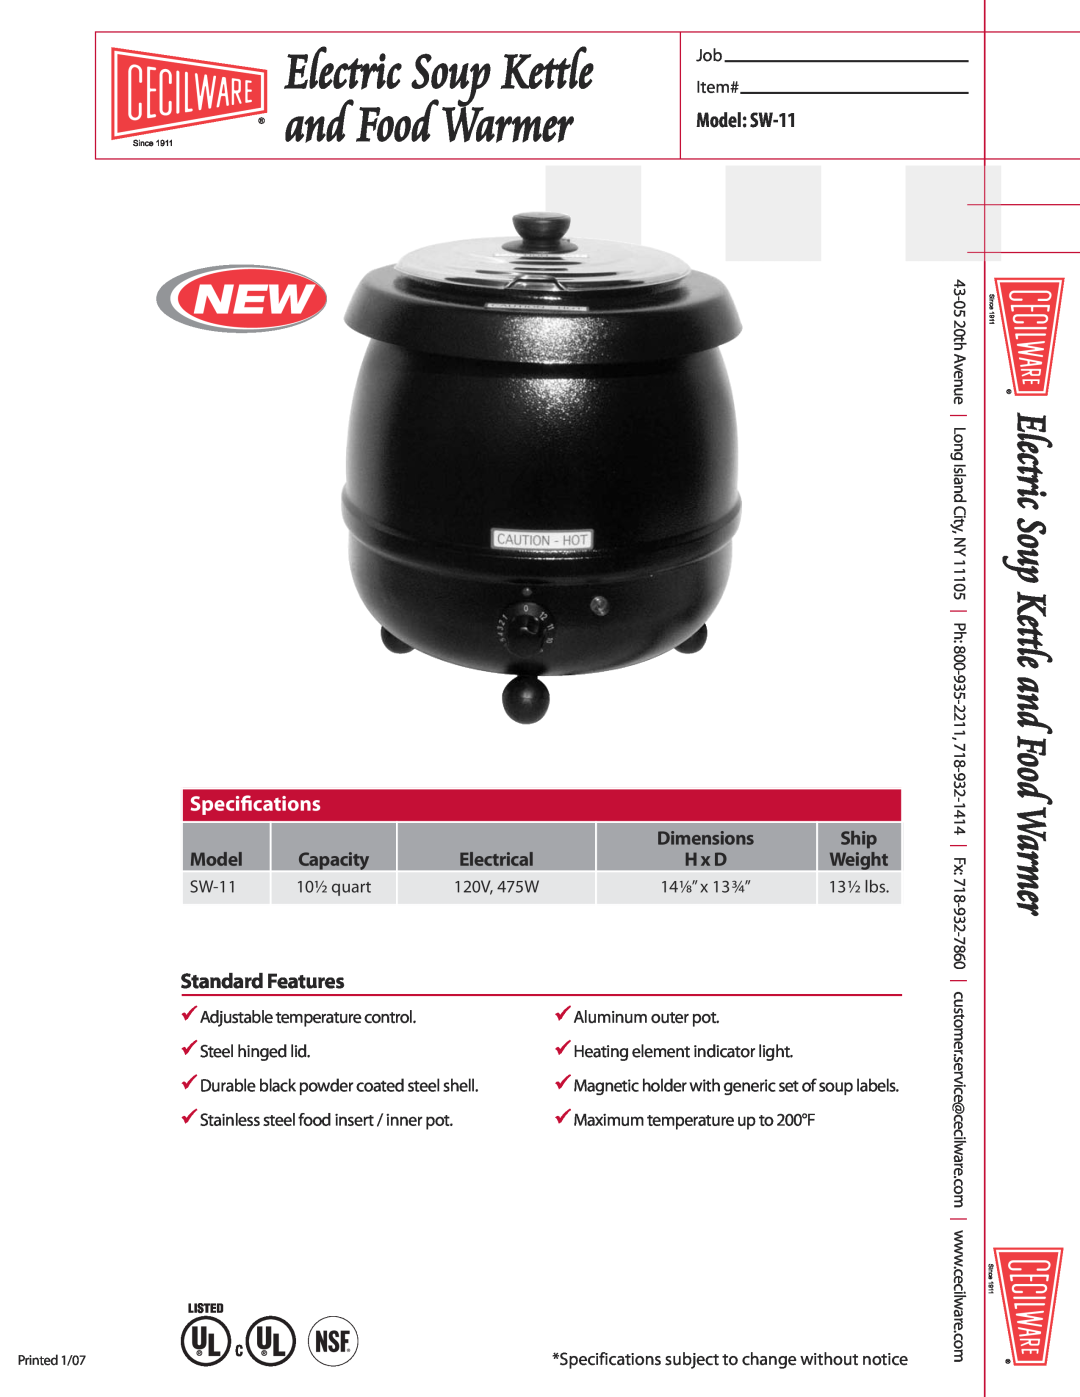 Cecilware specifications Electric Soup Kettle and Food Warmer, Model SW-11, Specications, StandardFeatures 